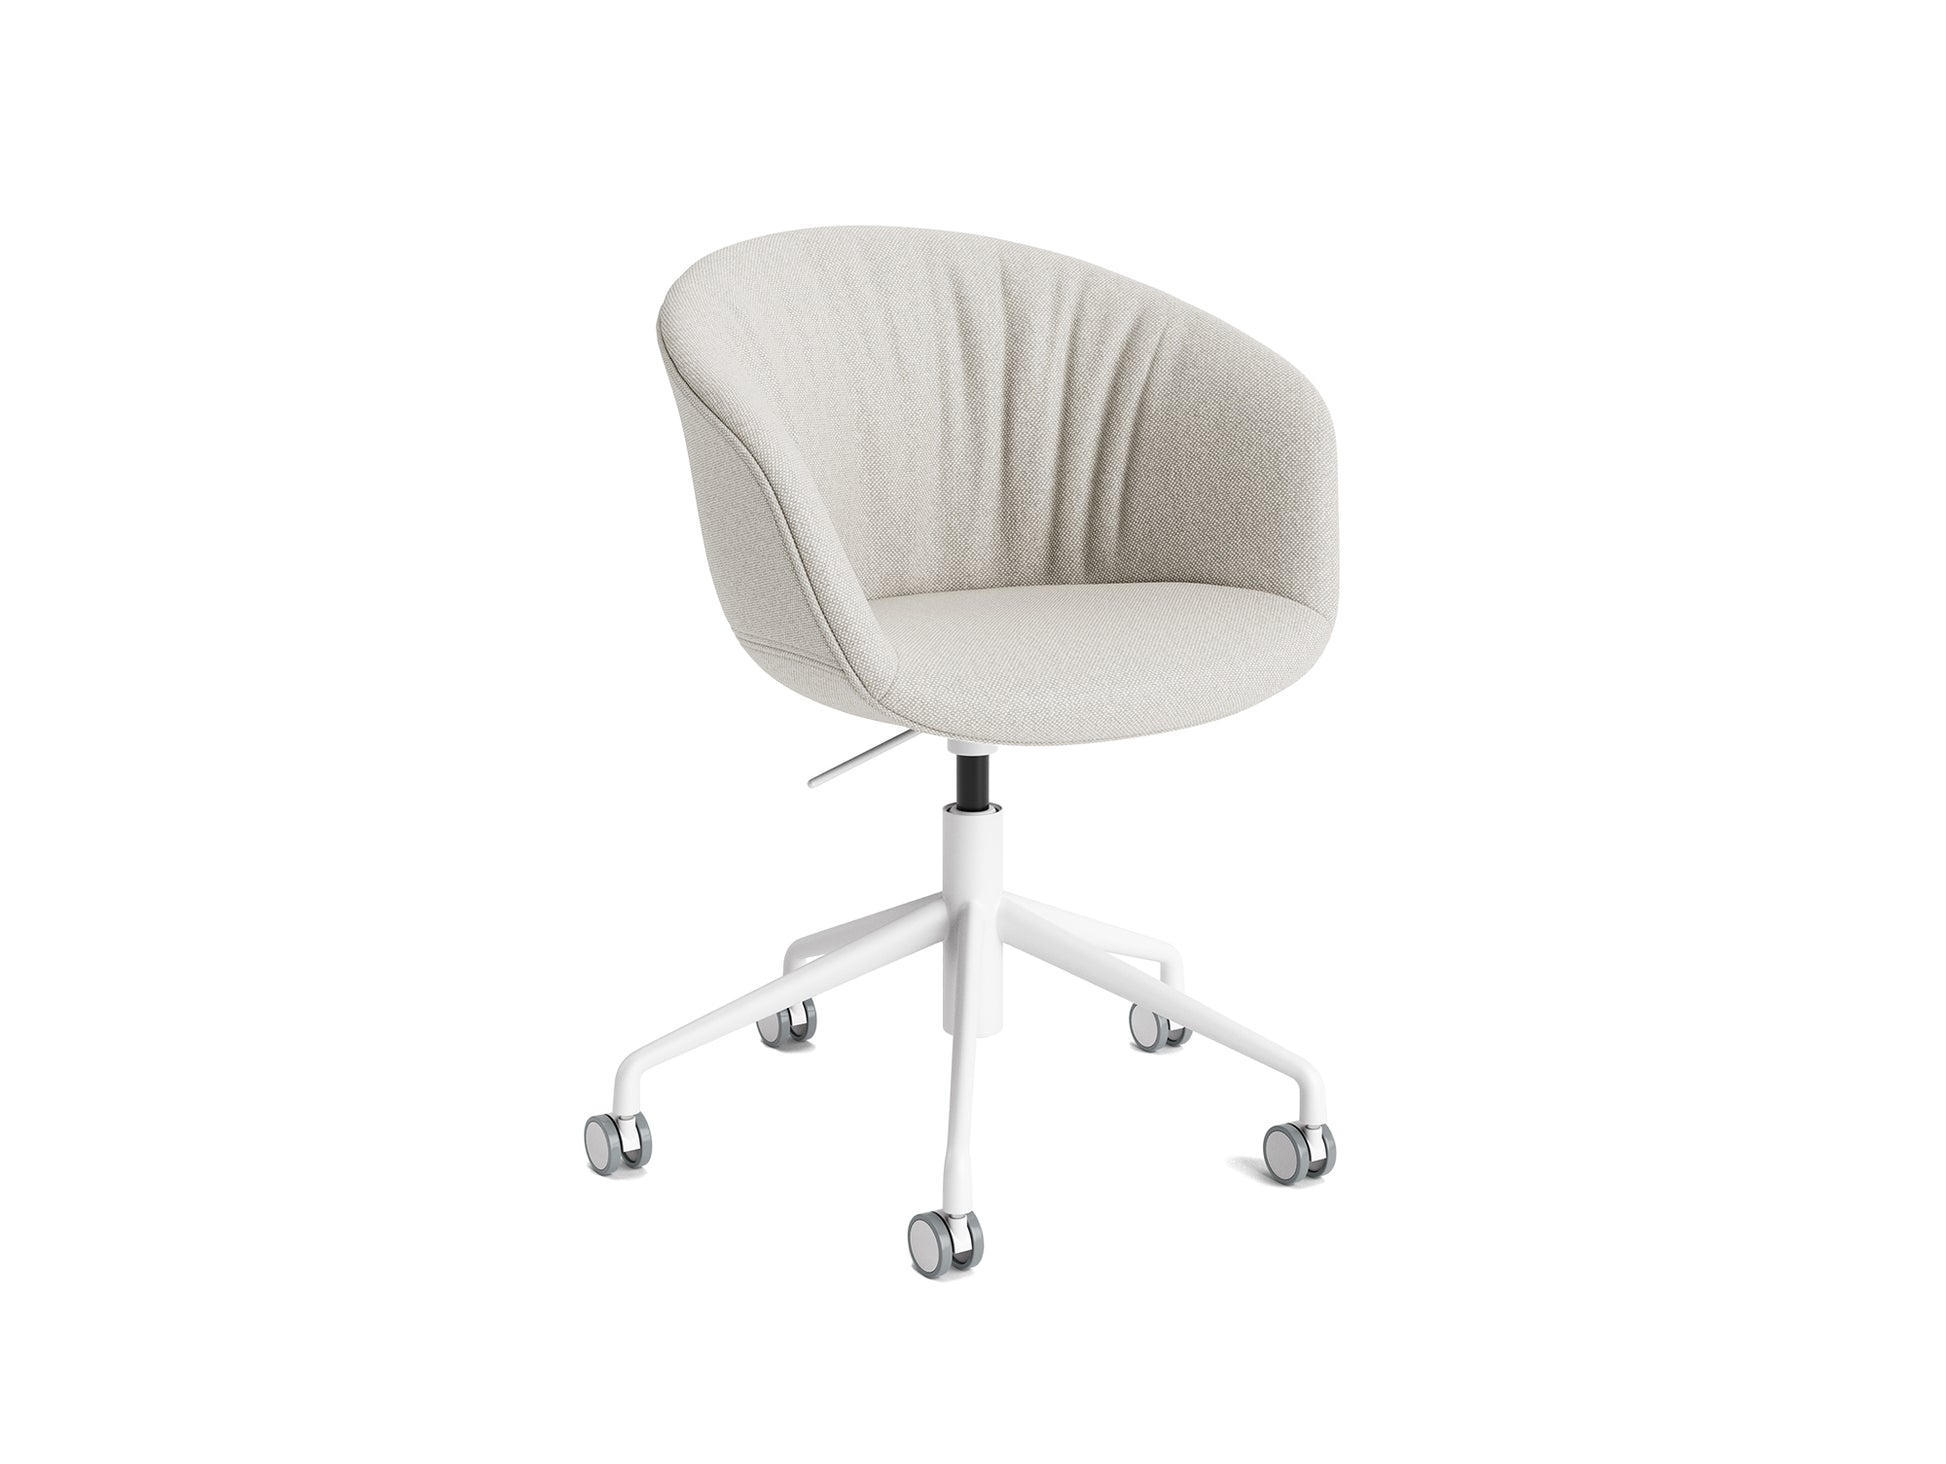 About A Chair AAC 53 Soft by HAY - Hallingdal 103 / White Powder Coated Aluminium